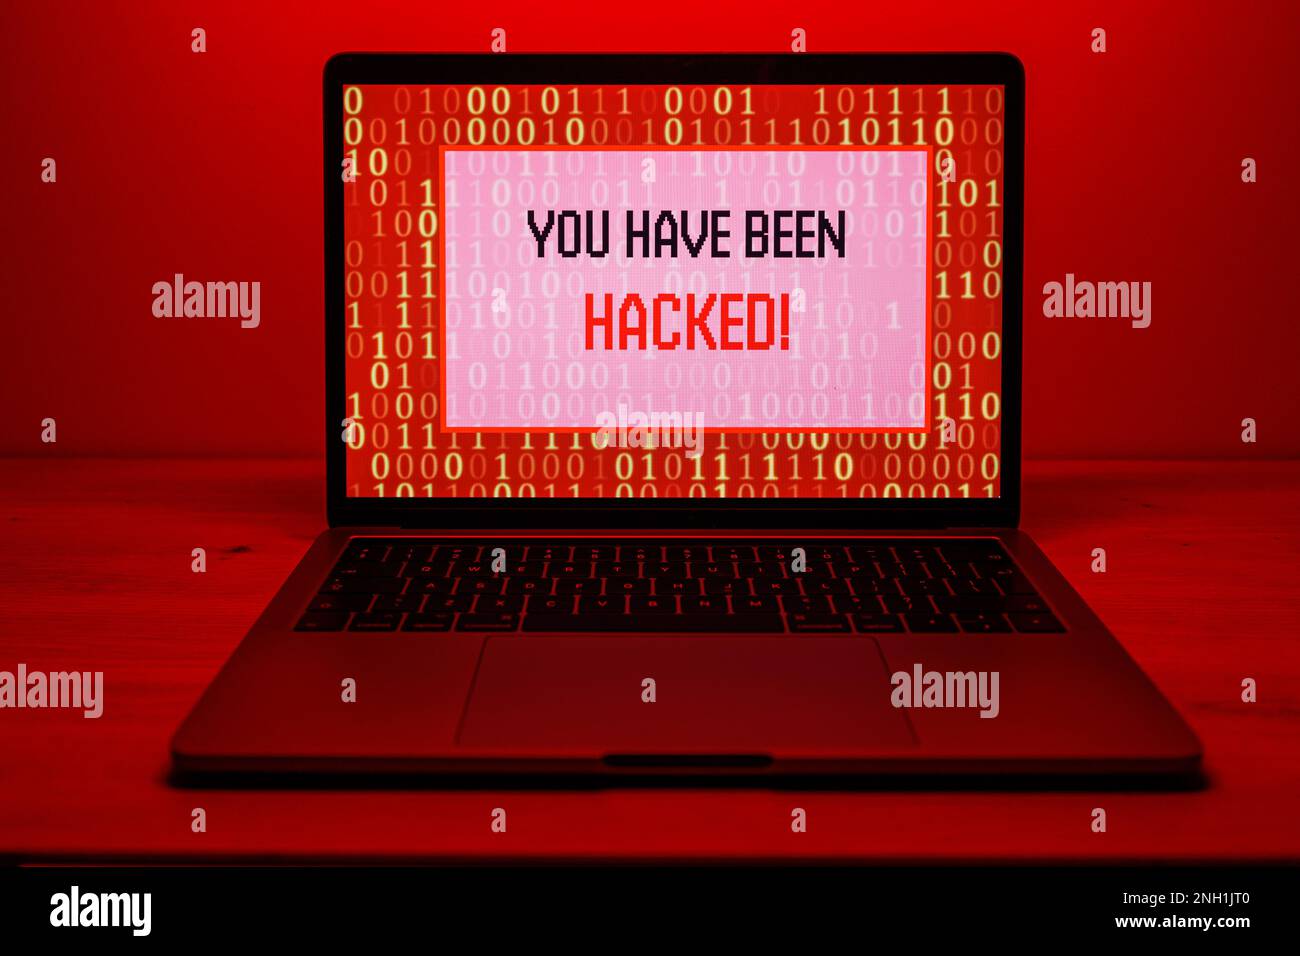 Hacker attack on Computer. Warning text on PC You have been hacked Stock Photo